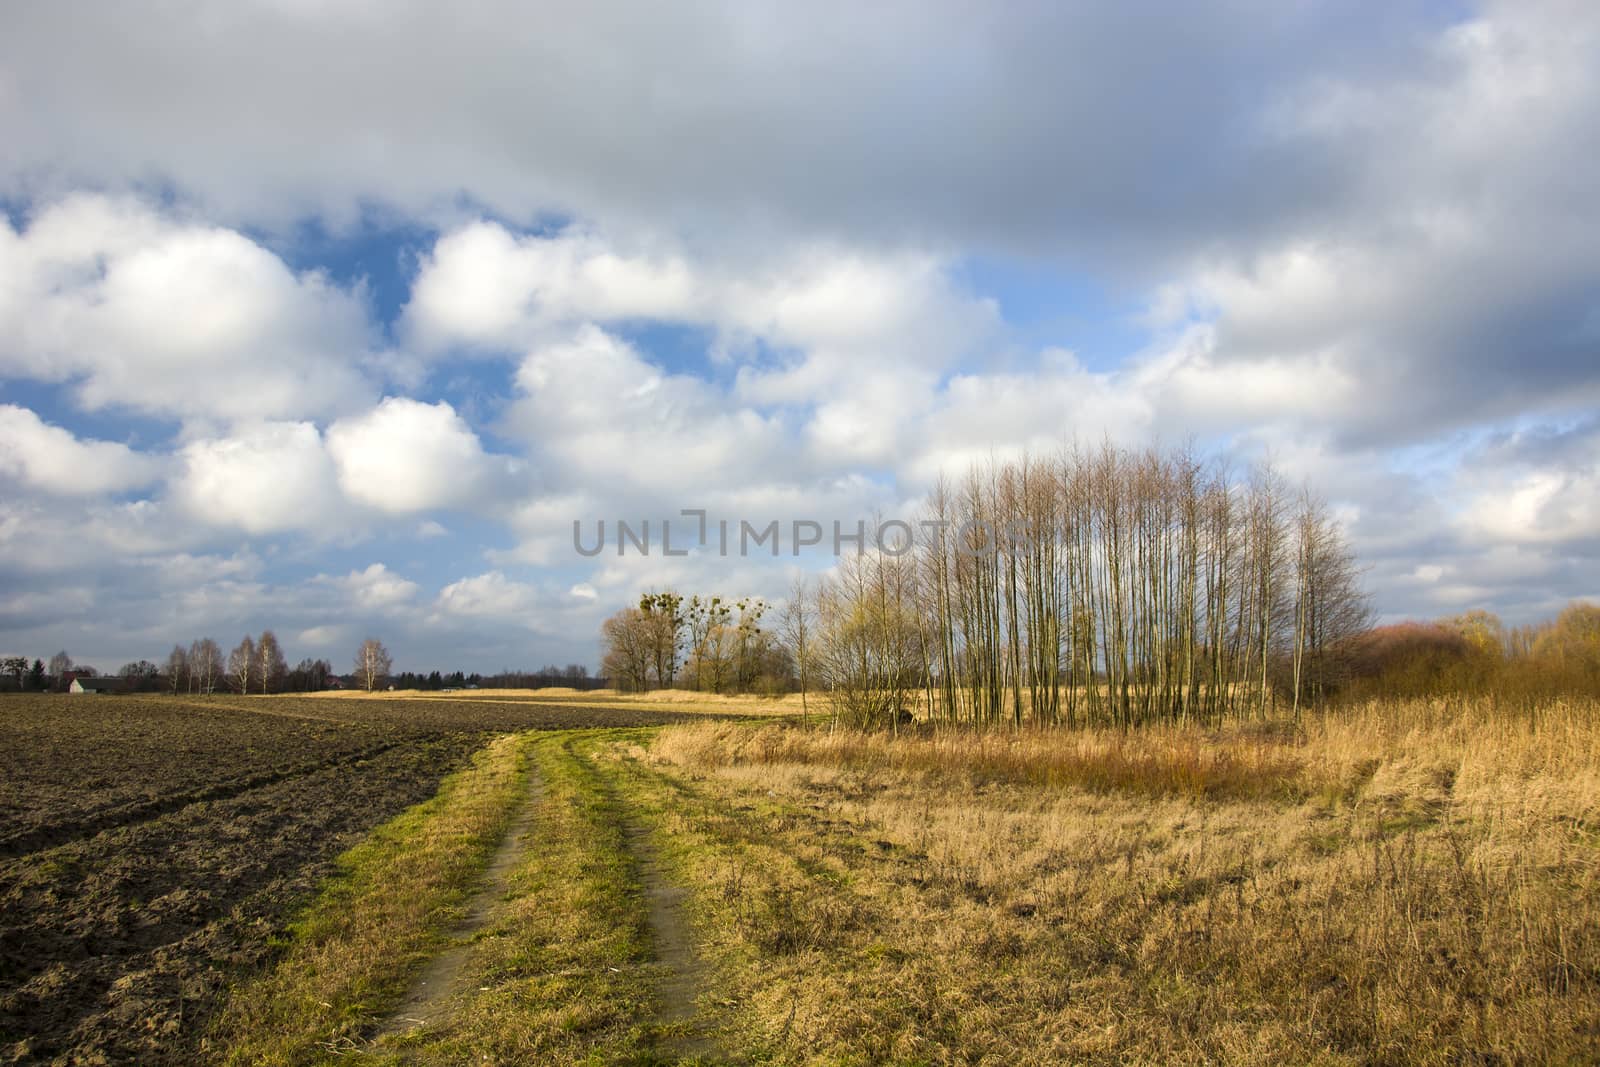 Dirt road next to a plowed field, autumn trees and white clouds on a blue sky